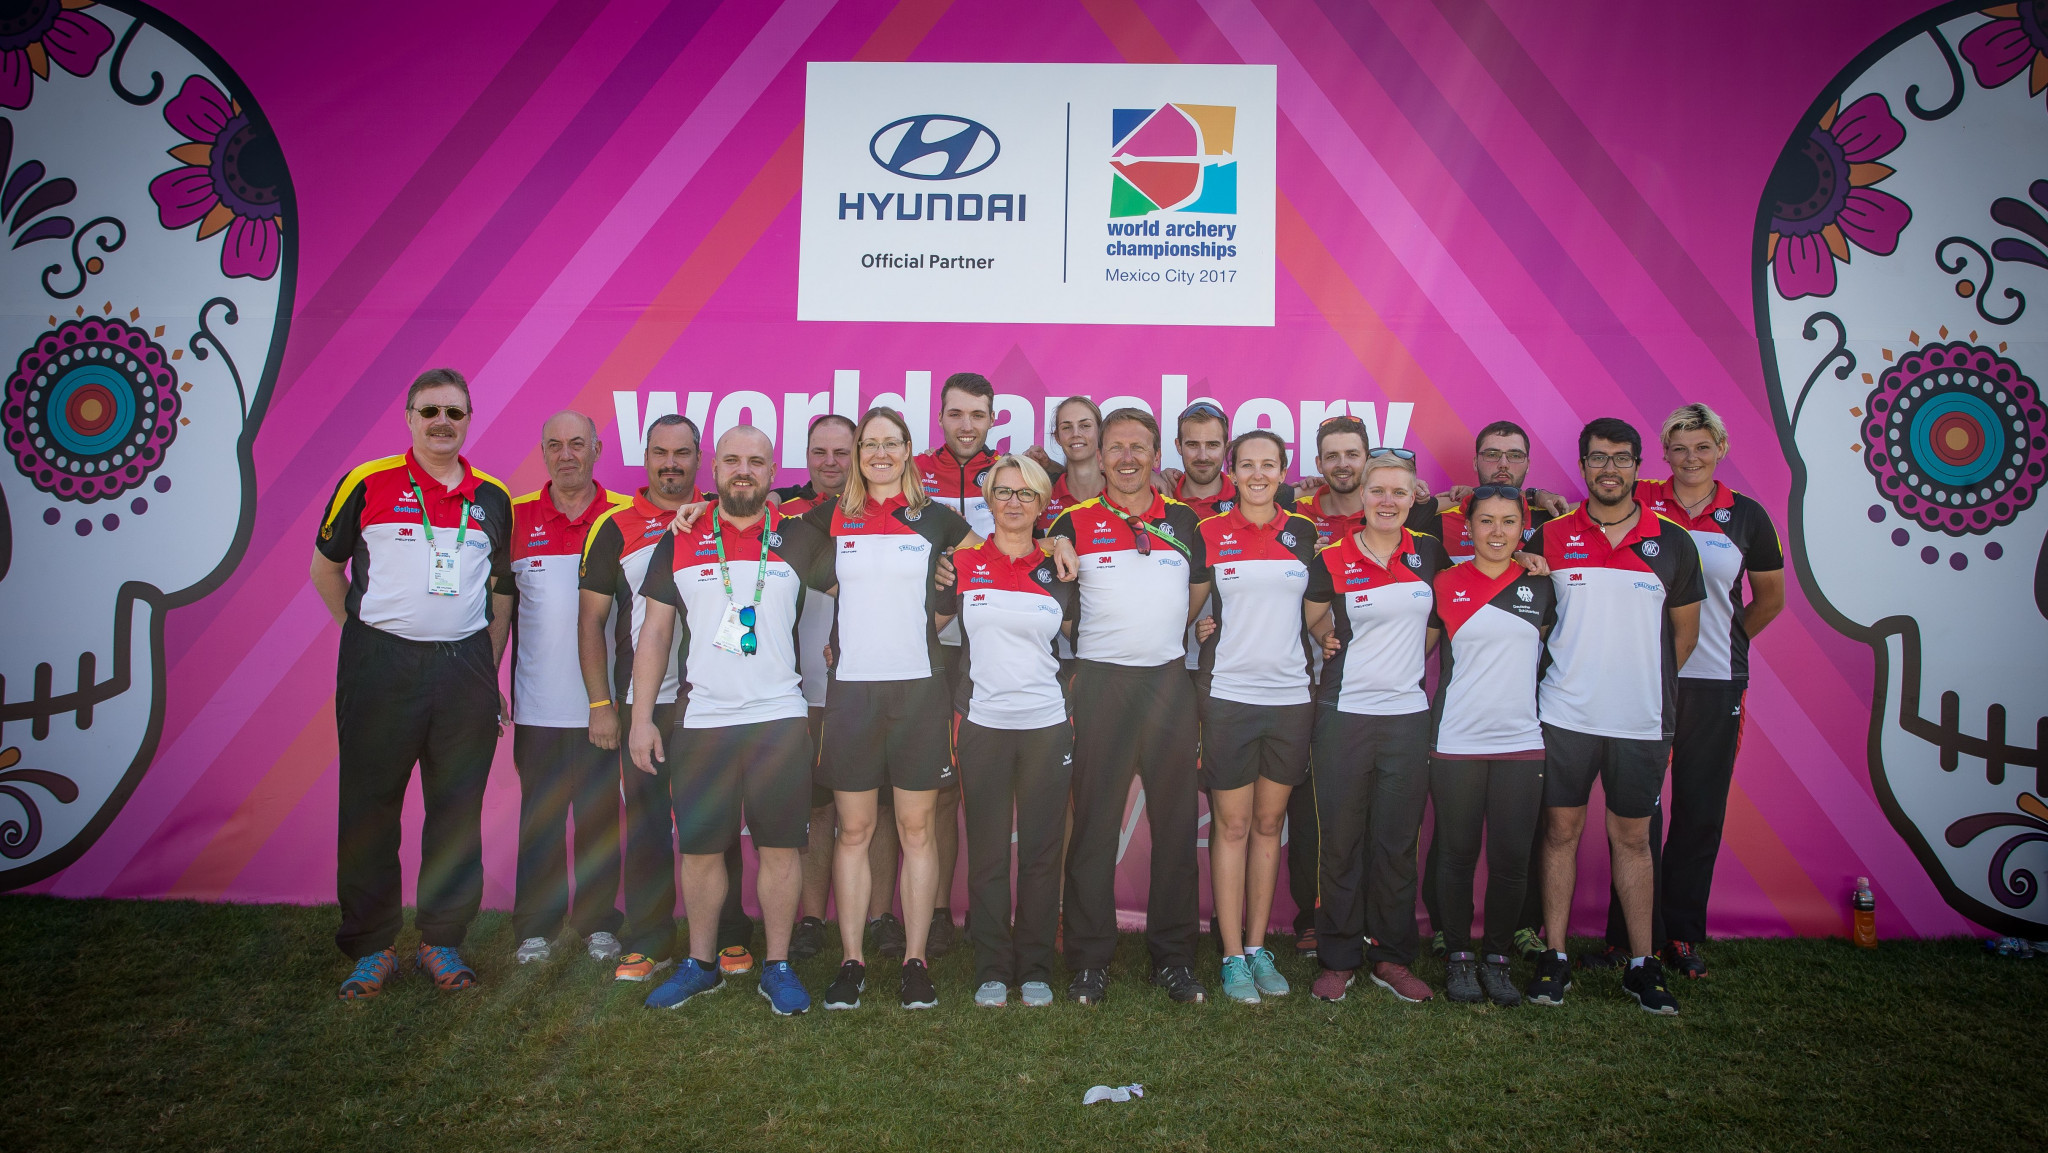 Germany reached both the compound and recurve mixed team finals on a successful day for the country at the World Archery Championships in Mexico City ©World Archery